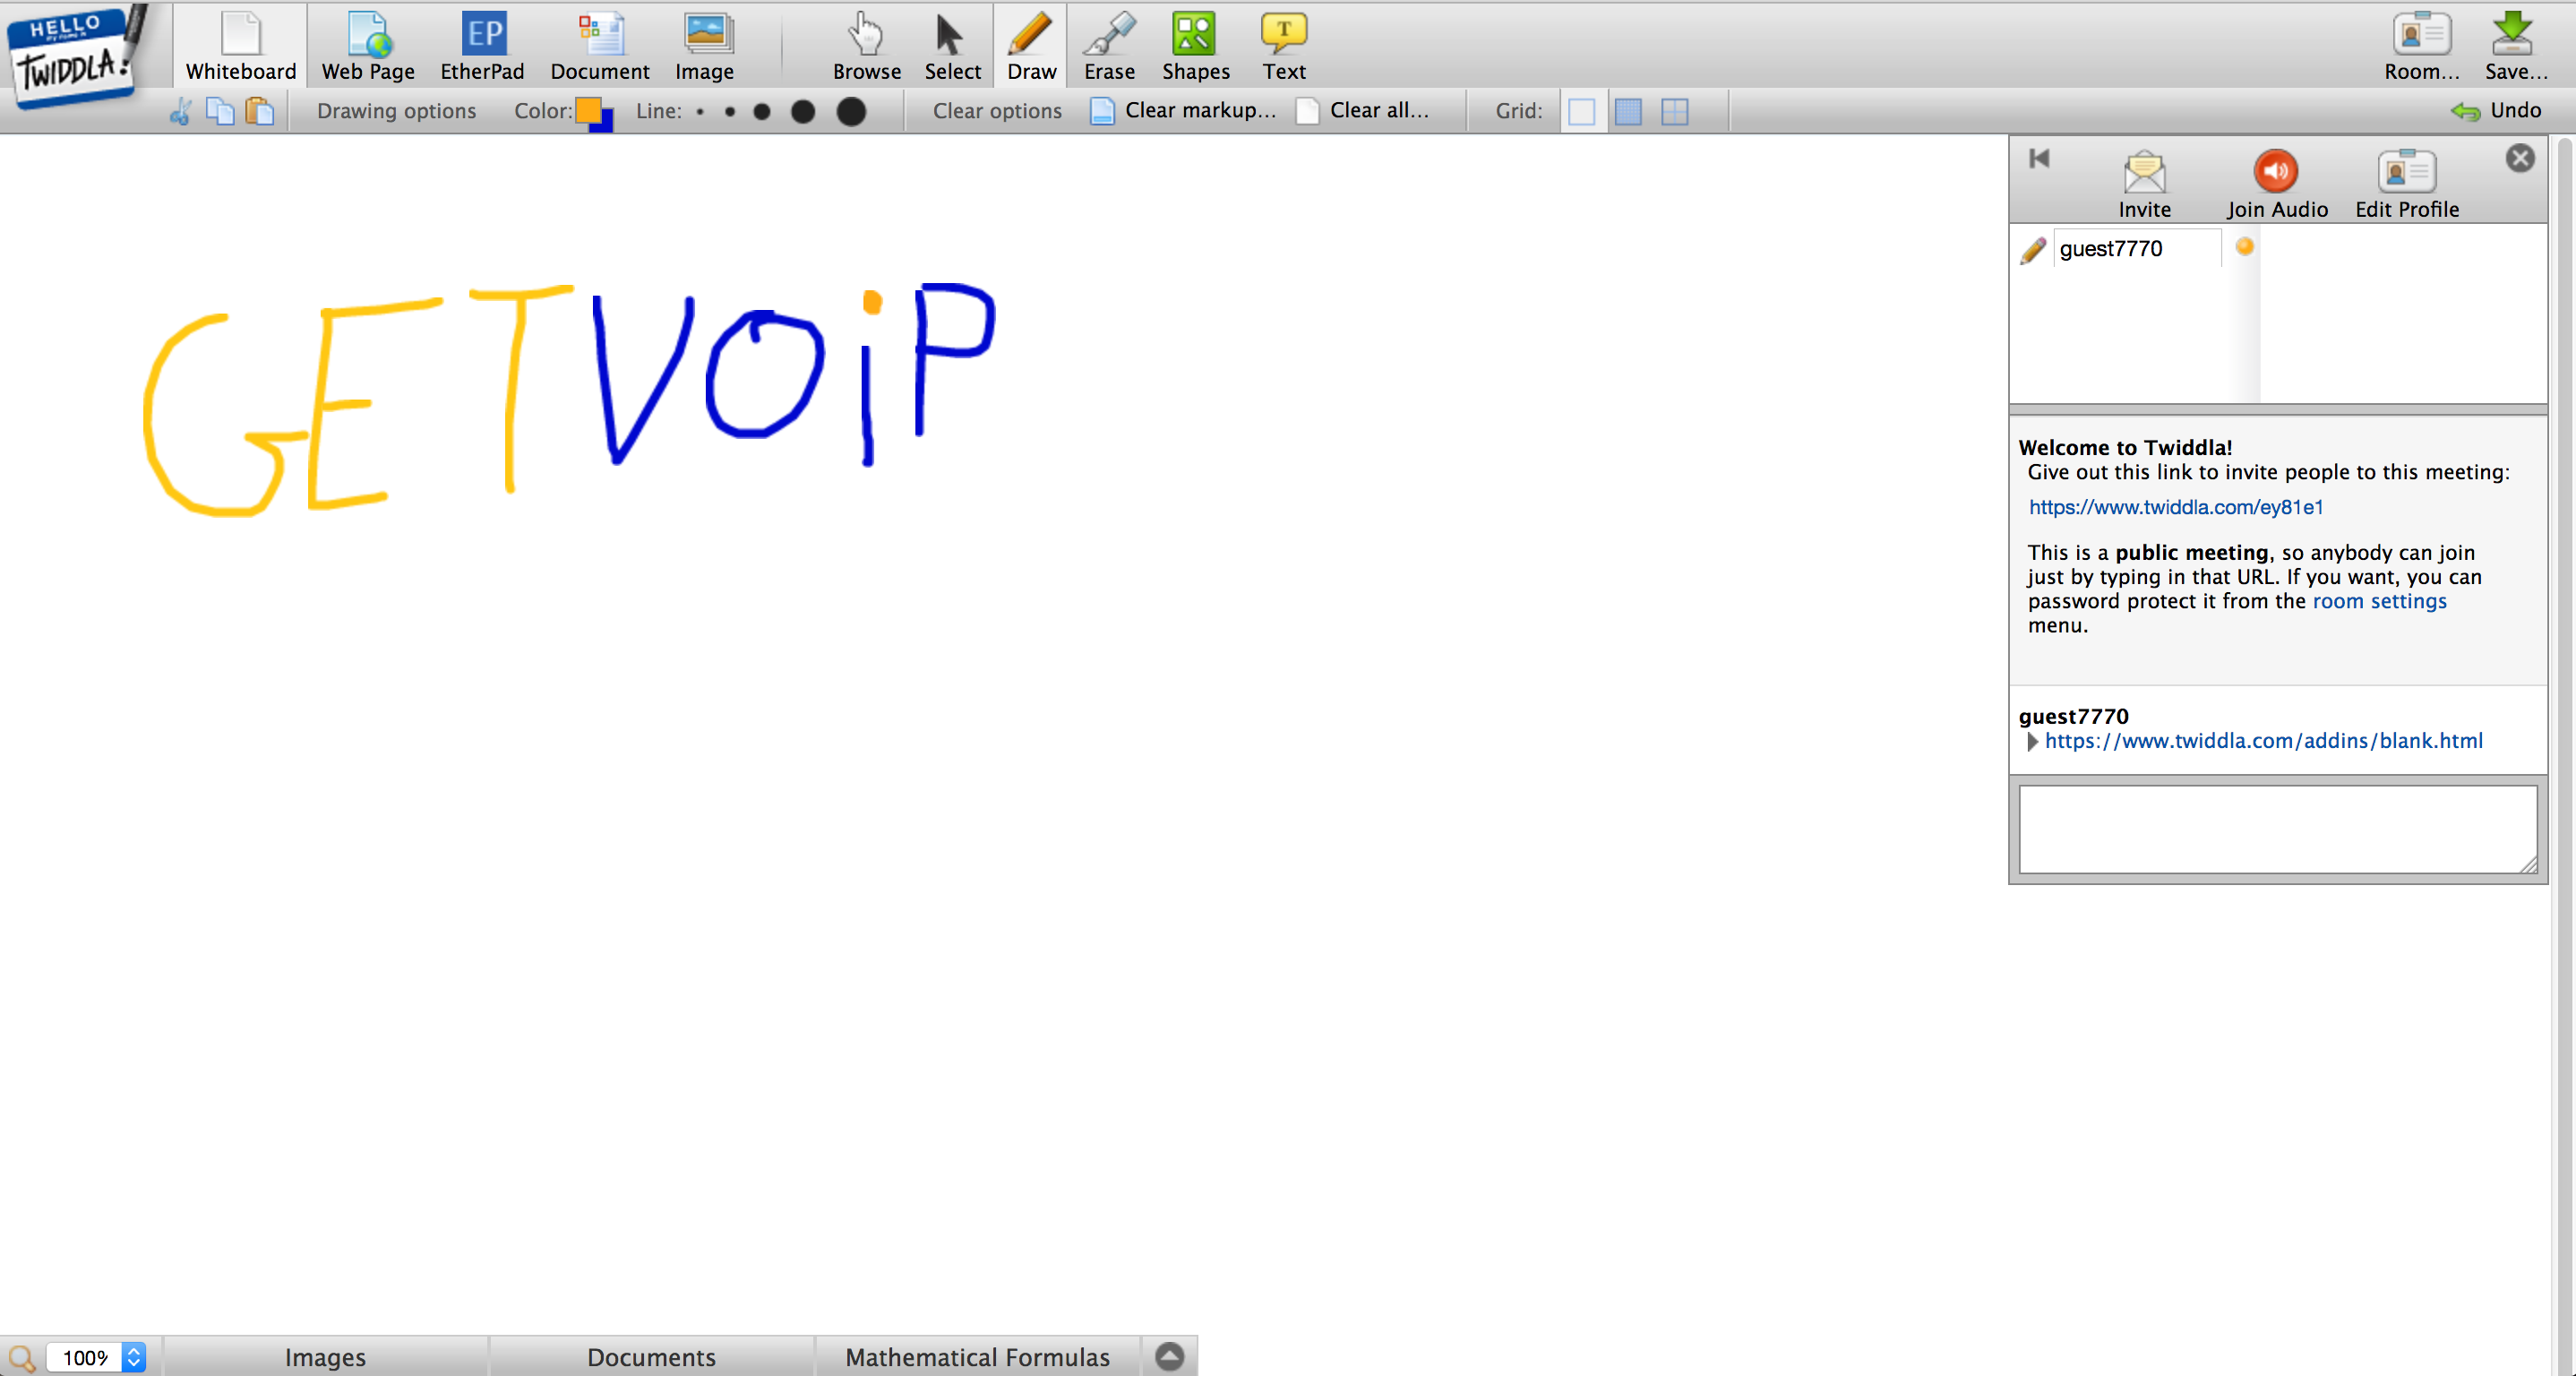 Best mac tool to draw on screens for web conferencing